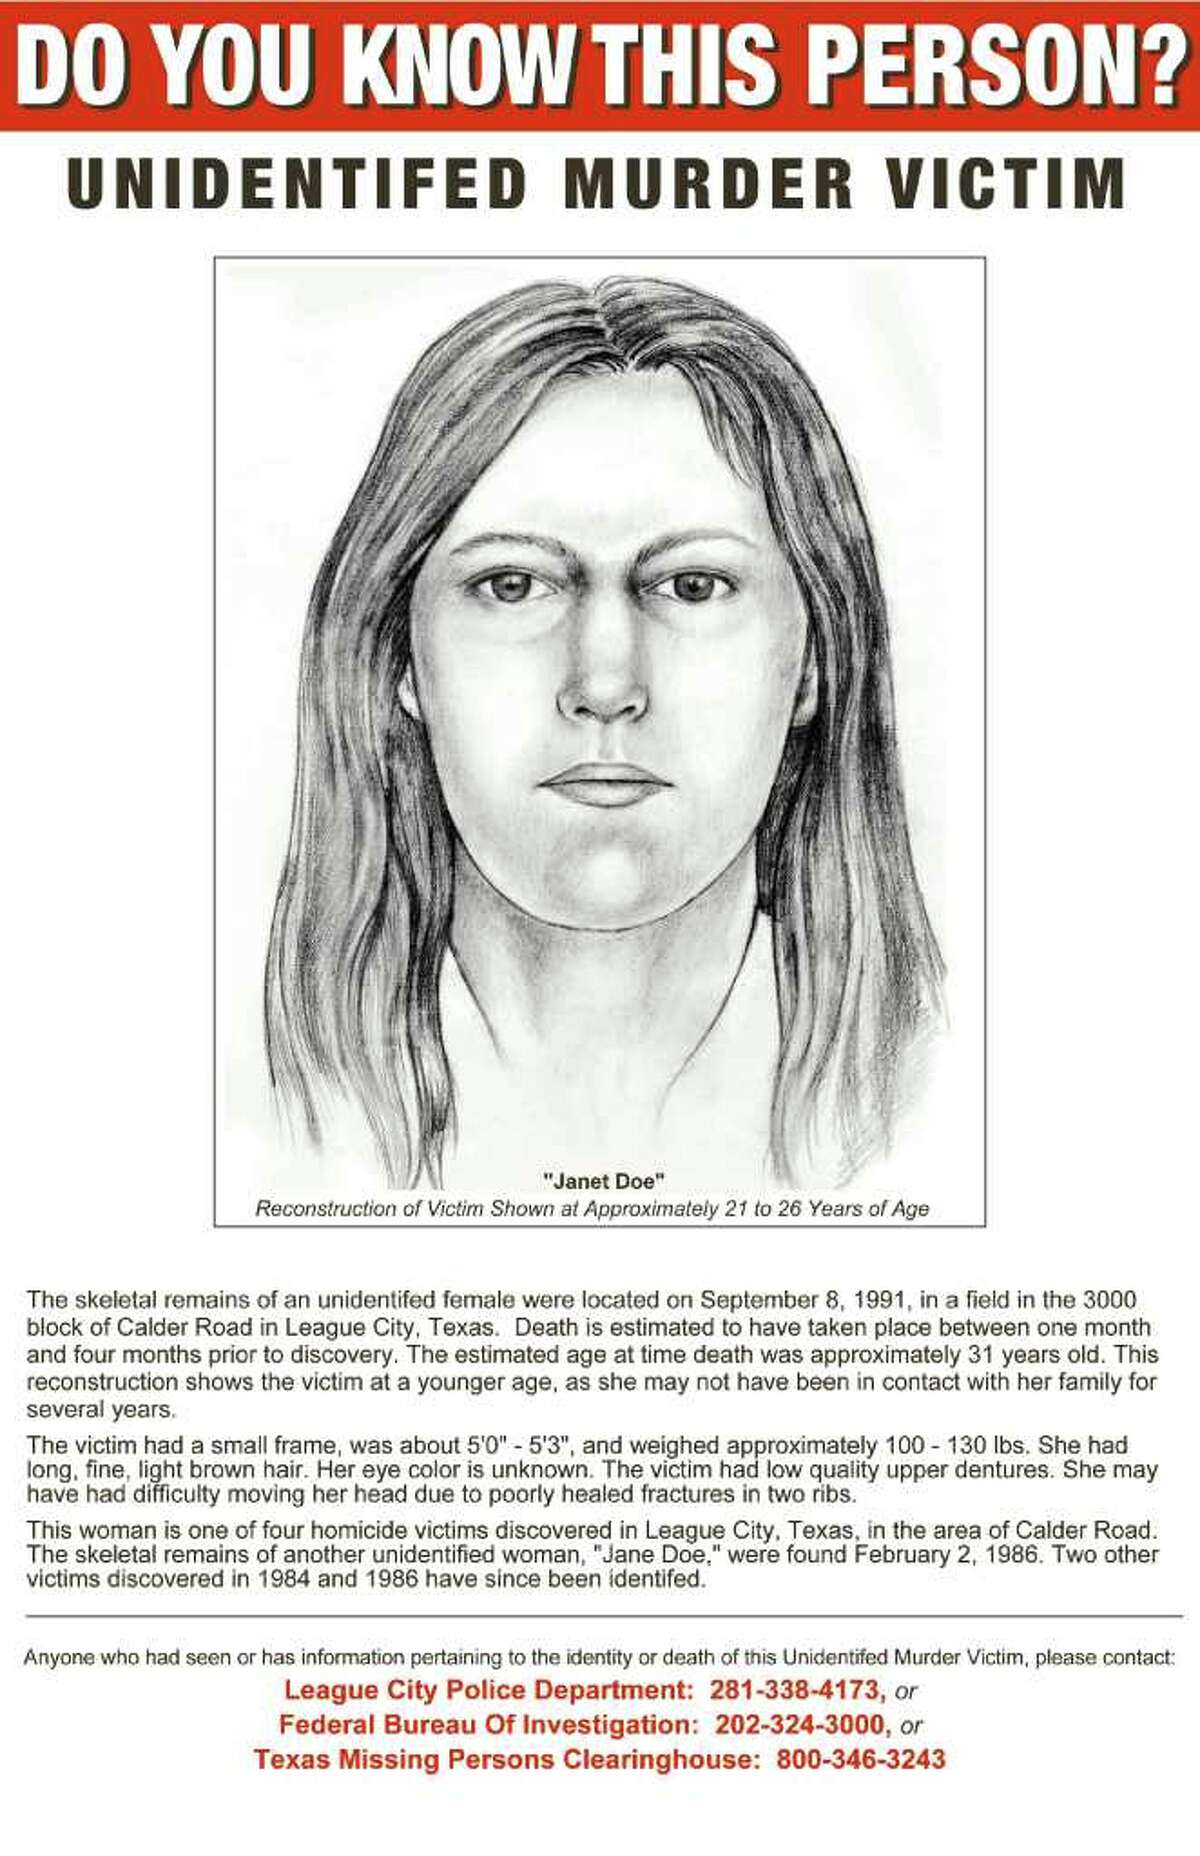 These are sketches of Jane Doe and Janet Doe in League City's "killing fields." Please note that the flyer has the word "Unidentified" misspelled. ¤